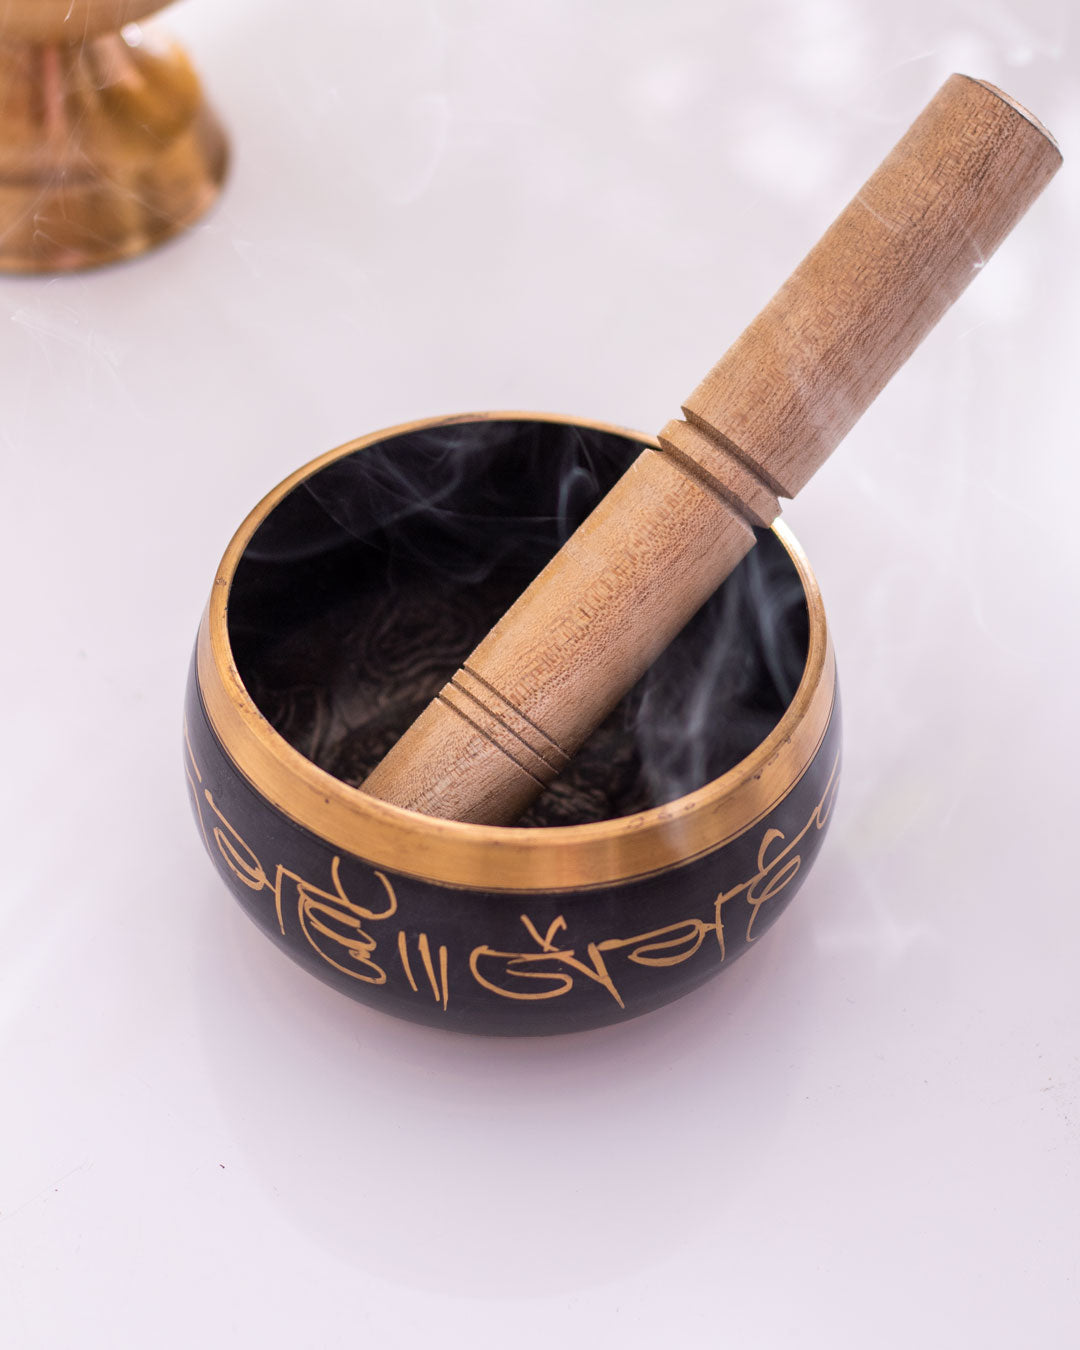 Singing Bowl with Wooden Stick - 4"